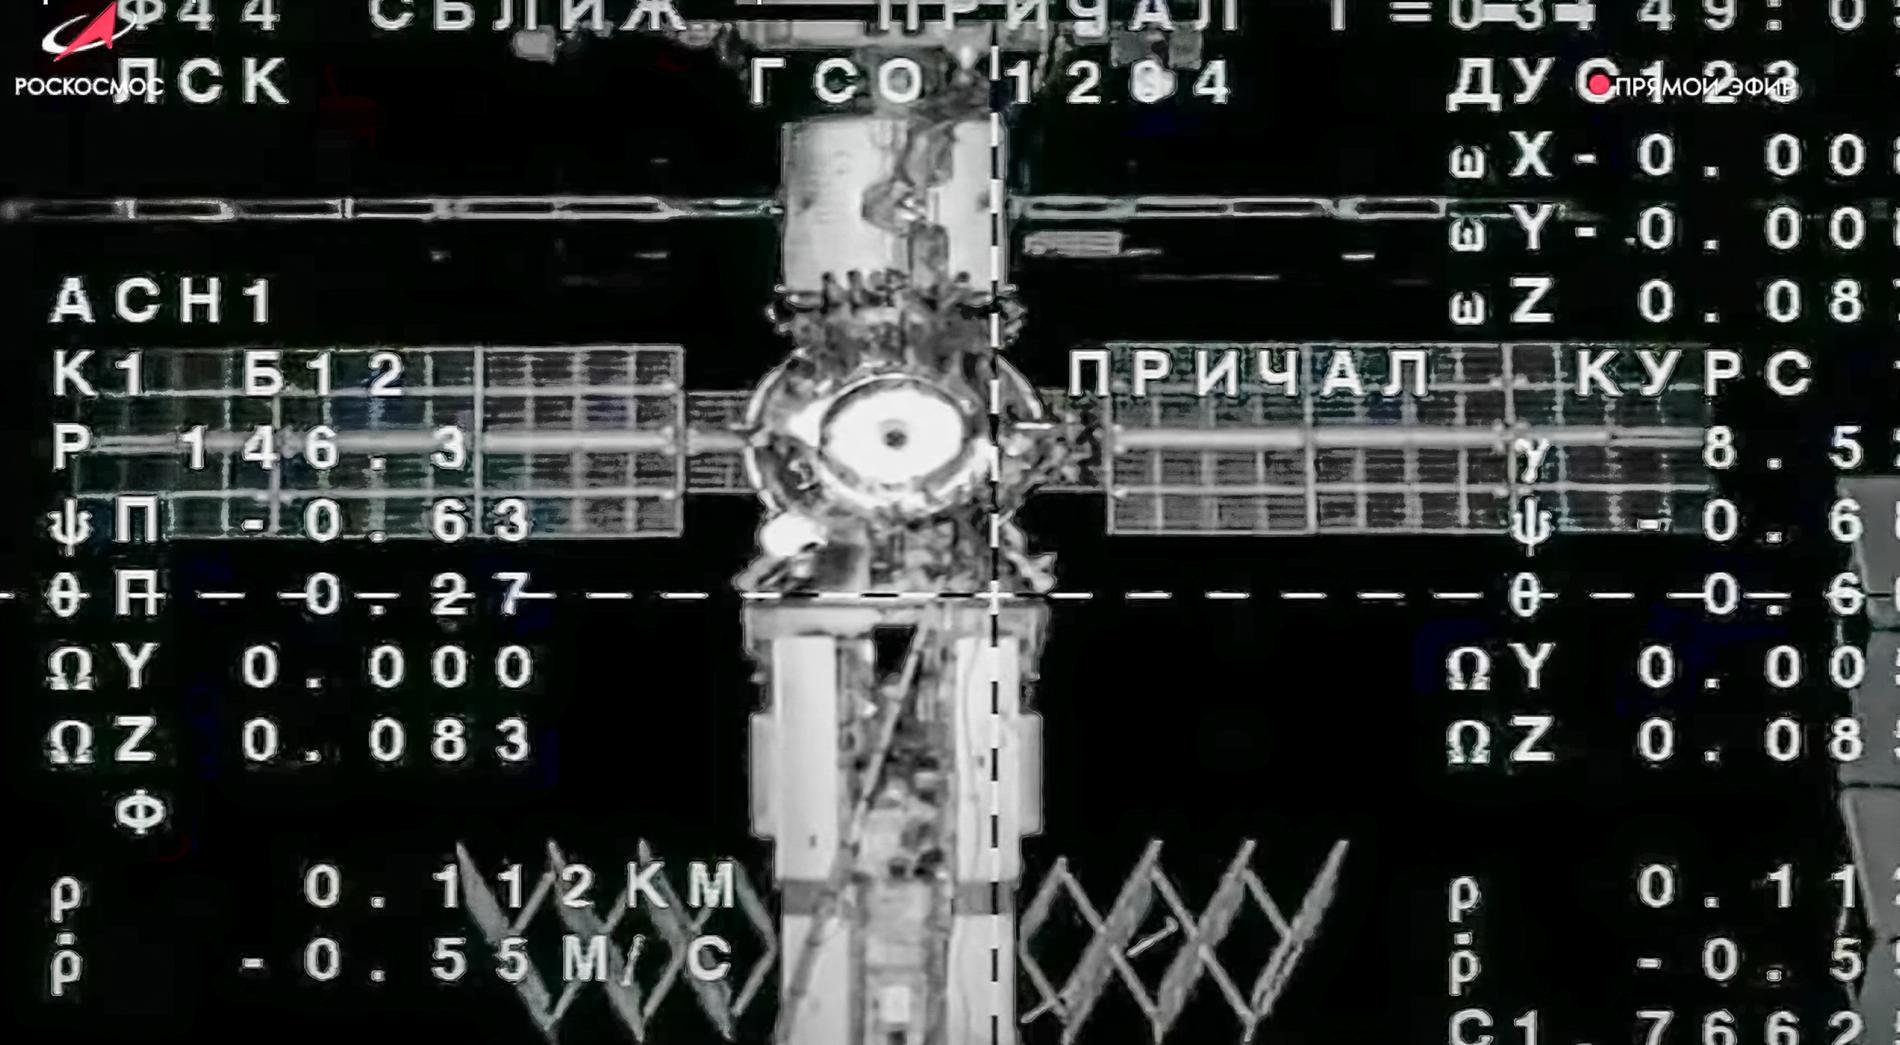 The Russian spacecraft has arrived at the International Space Station